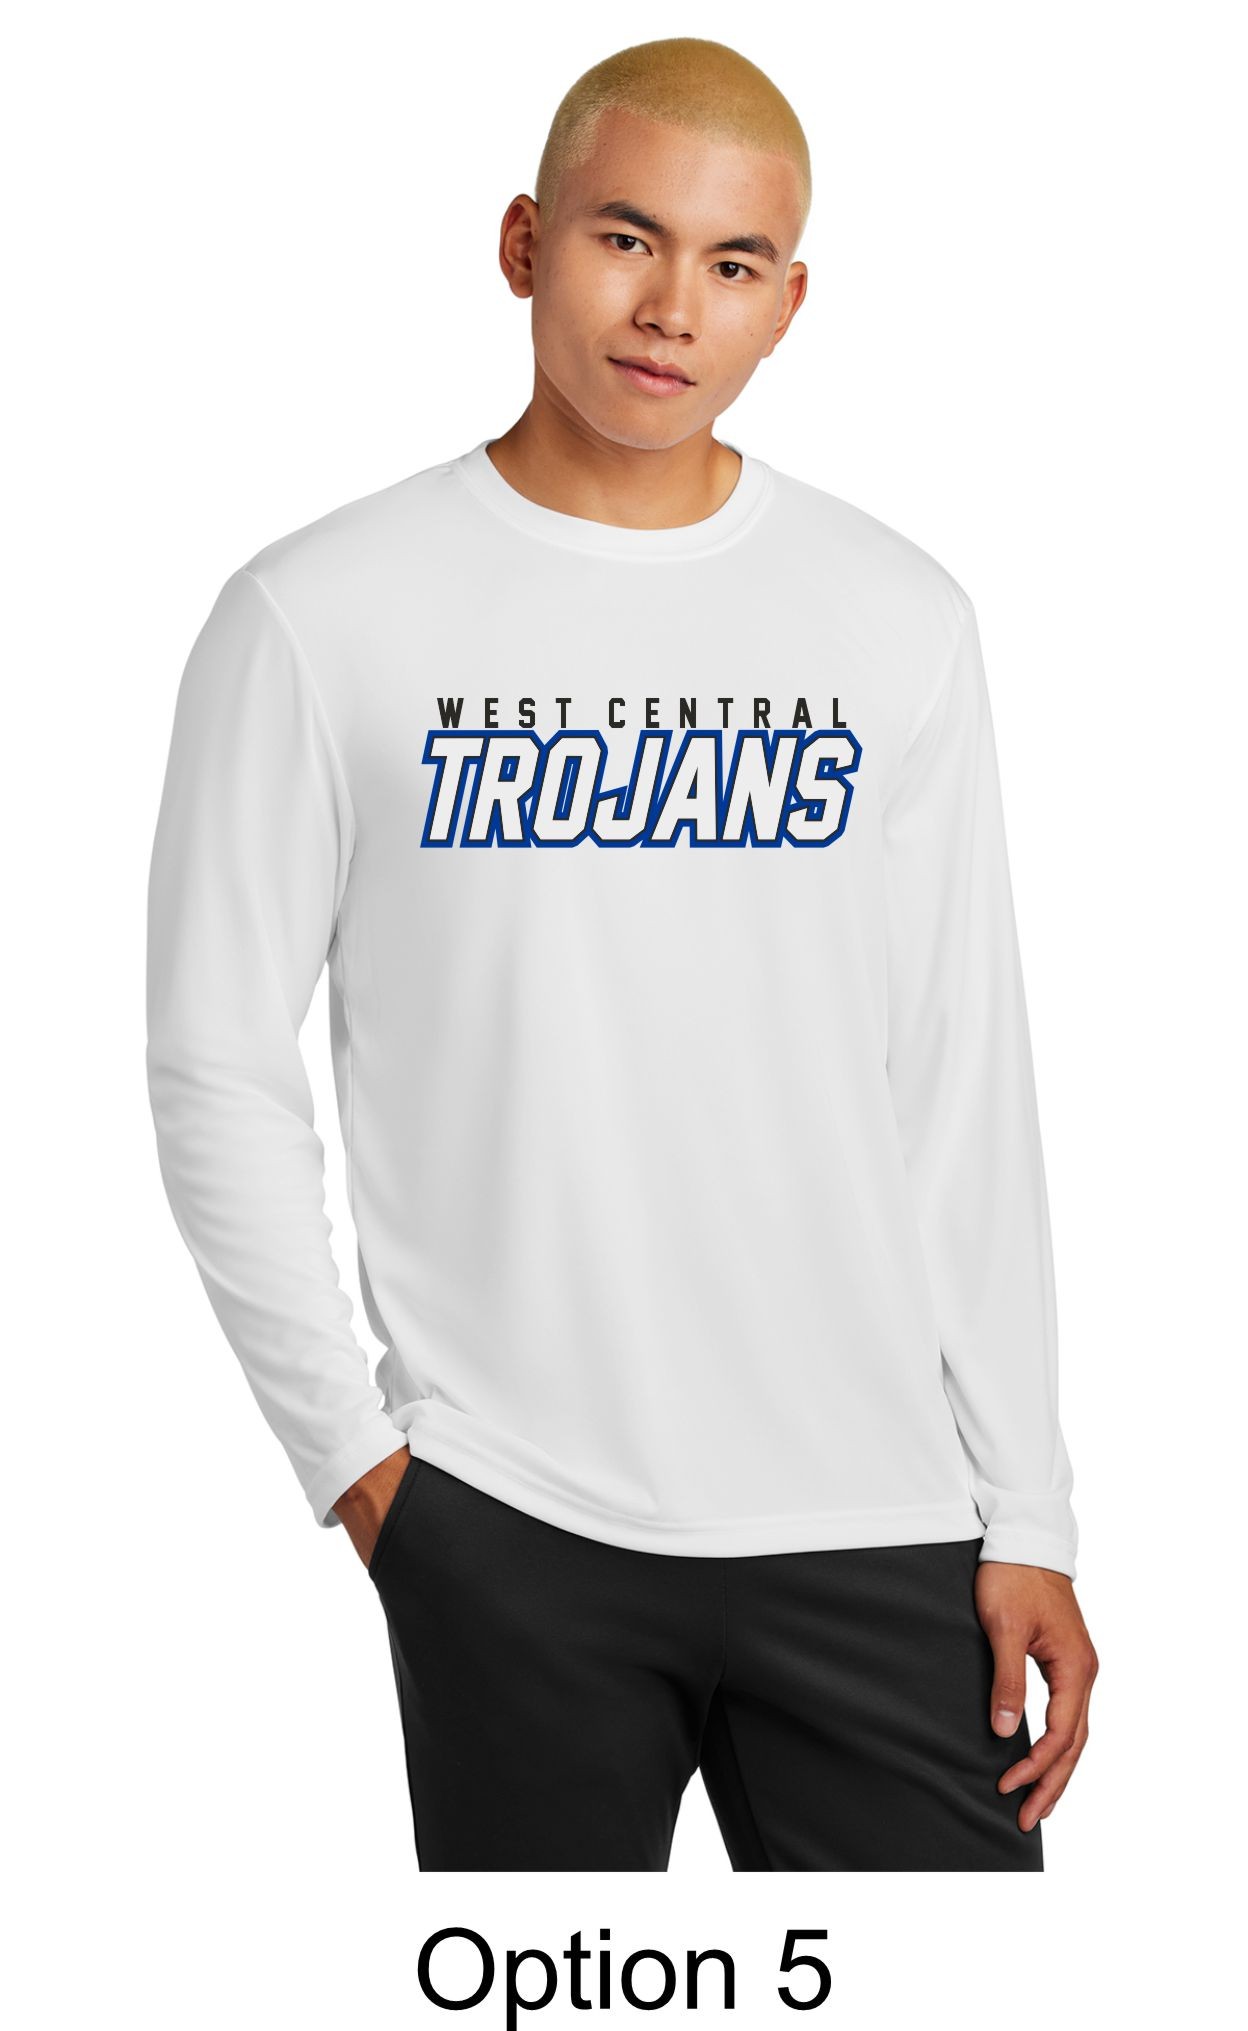 West Central Customizable Dri-Fit Long Sleeve - White